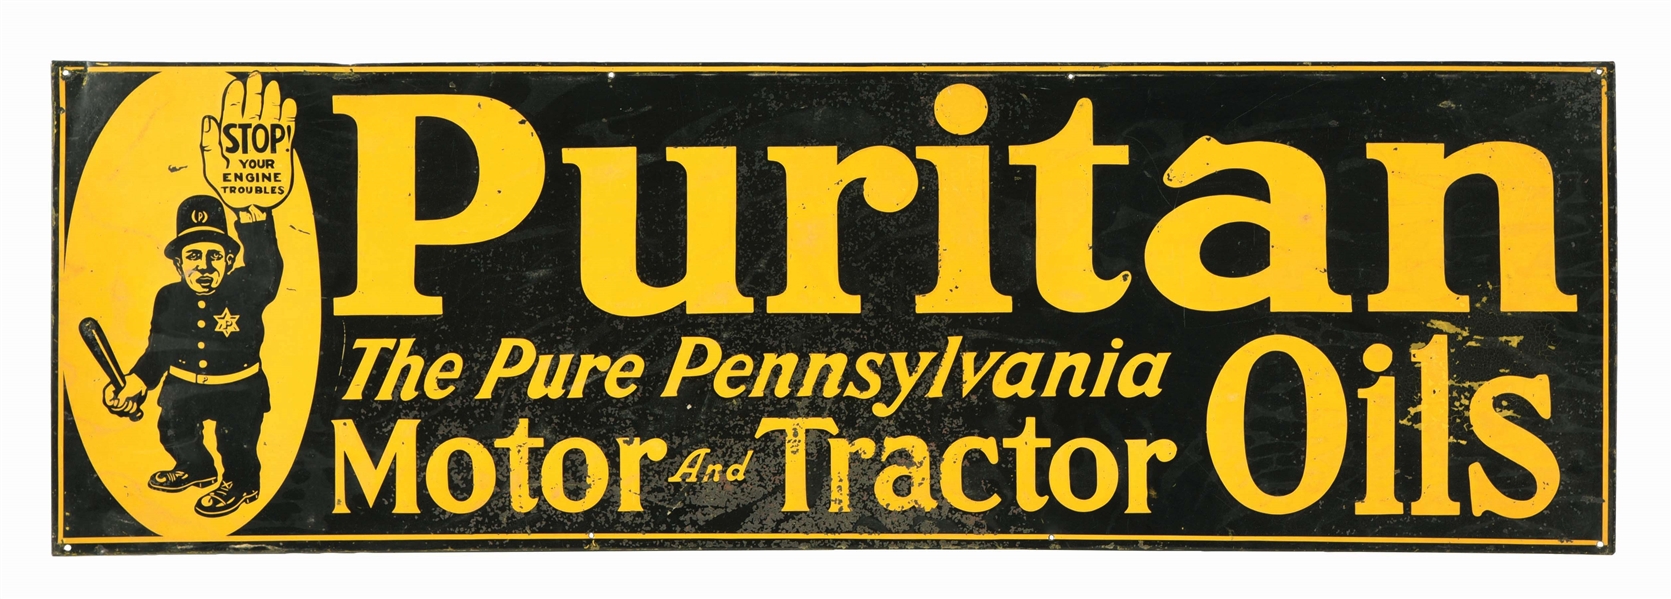 PURITAN MOTOR & TRACTOR OILS EMBOSSED TIN SIGN W/ POLICE OFFICER GRAPHIC. 